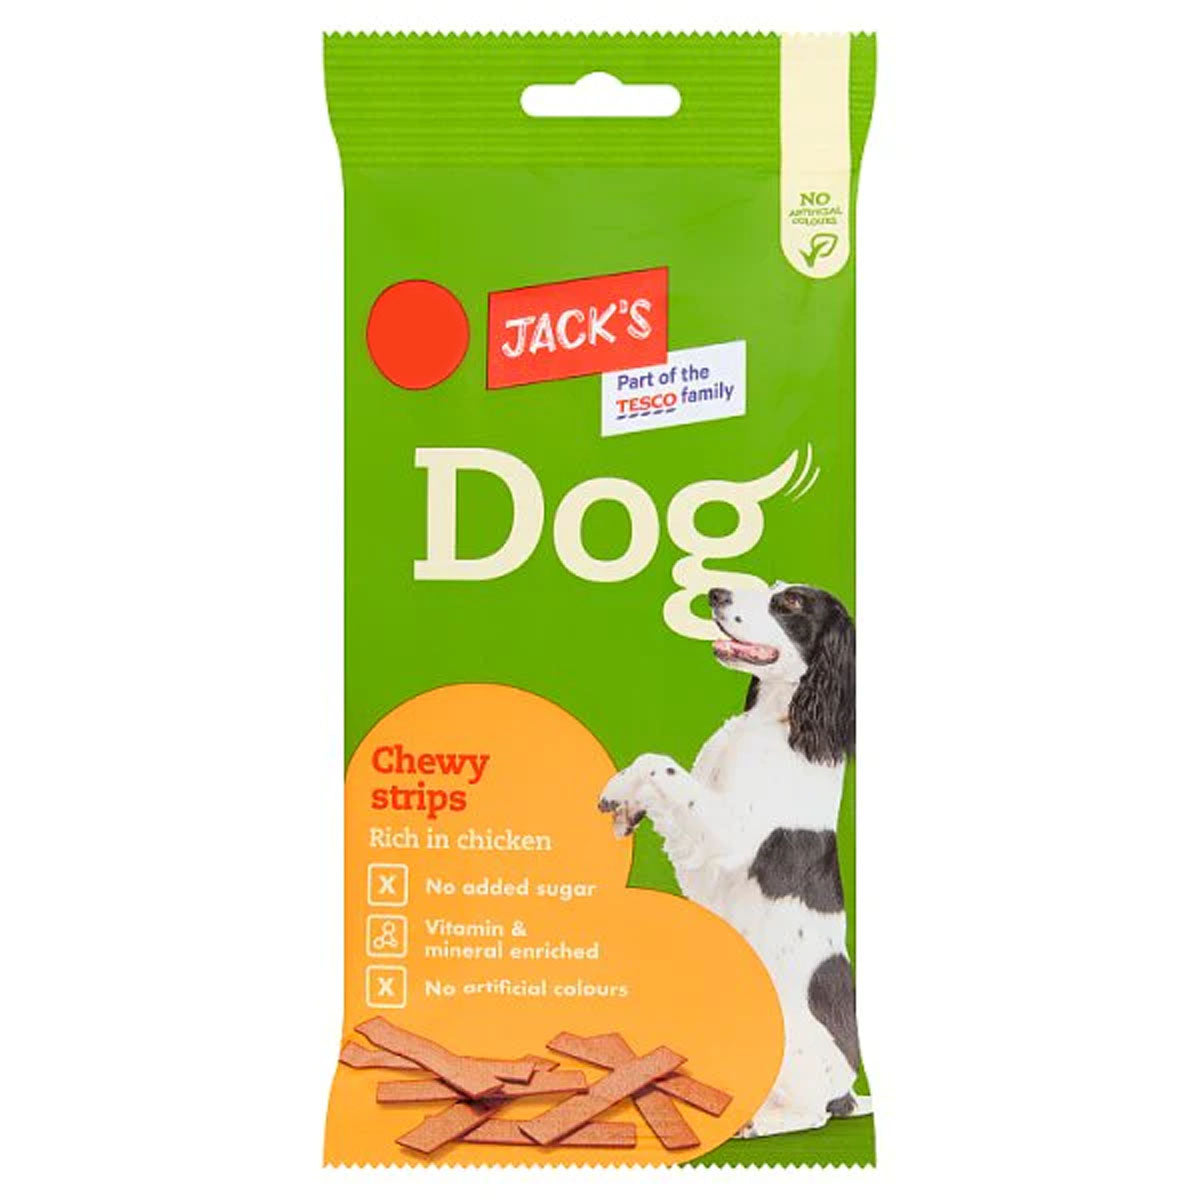 Jack's - Dog Chewy Strips - 150g in a package.